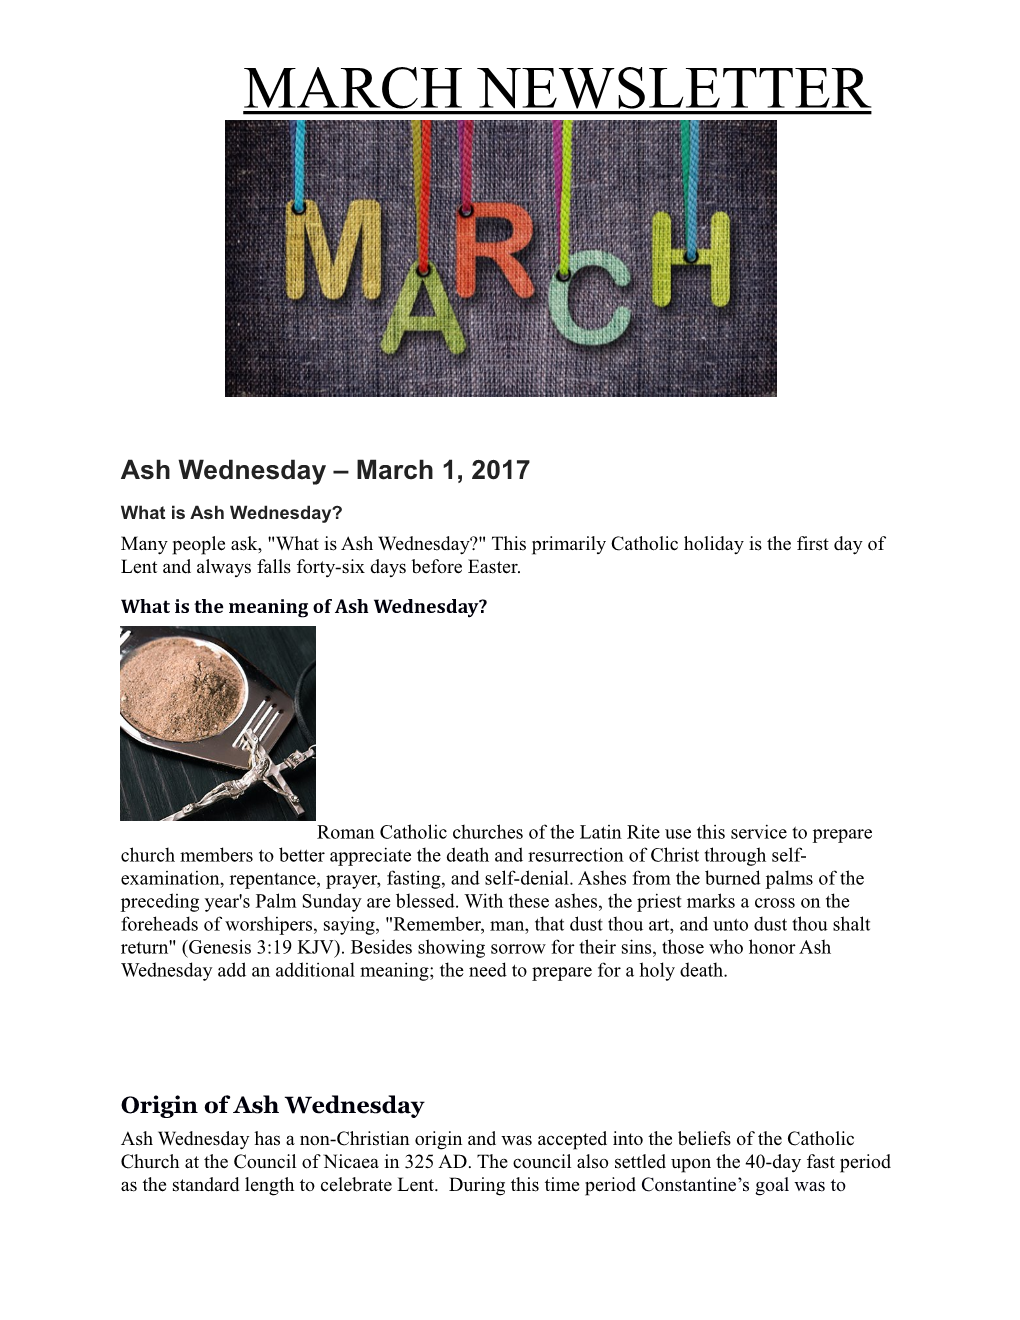 What Is the Meaning of Ash Wednesday?